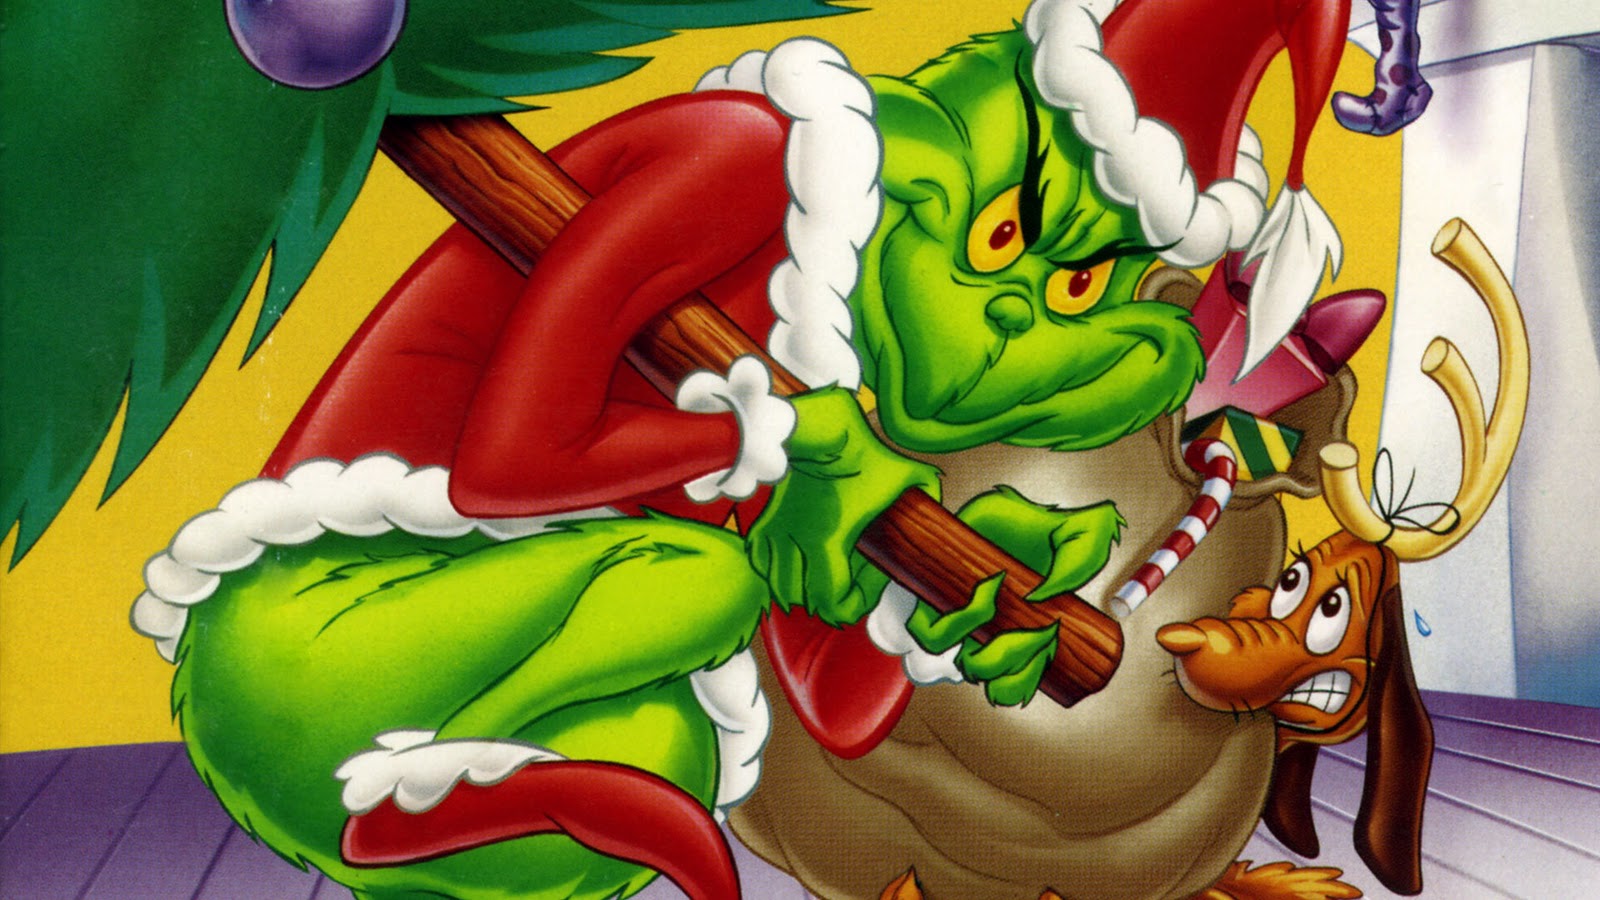 How to prevent a grinch from stealing your holiday presents